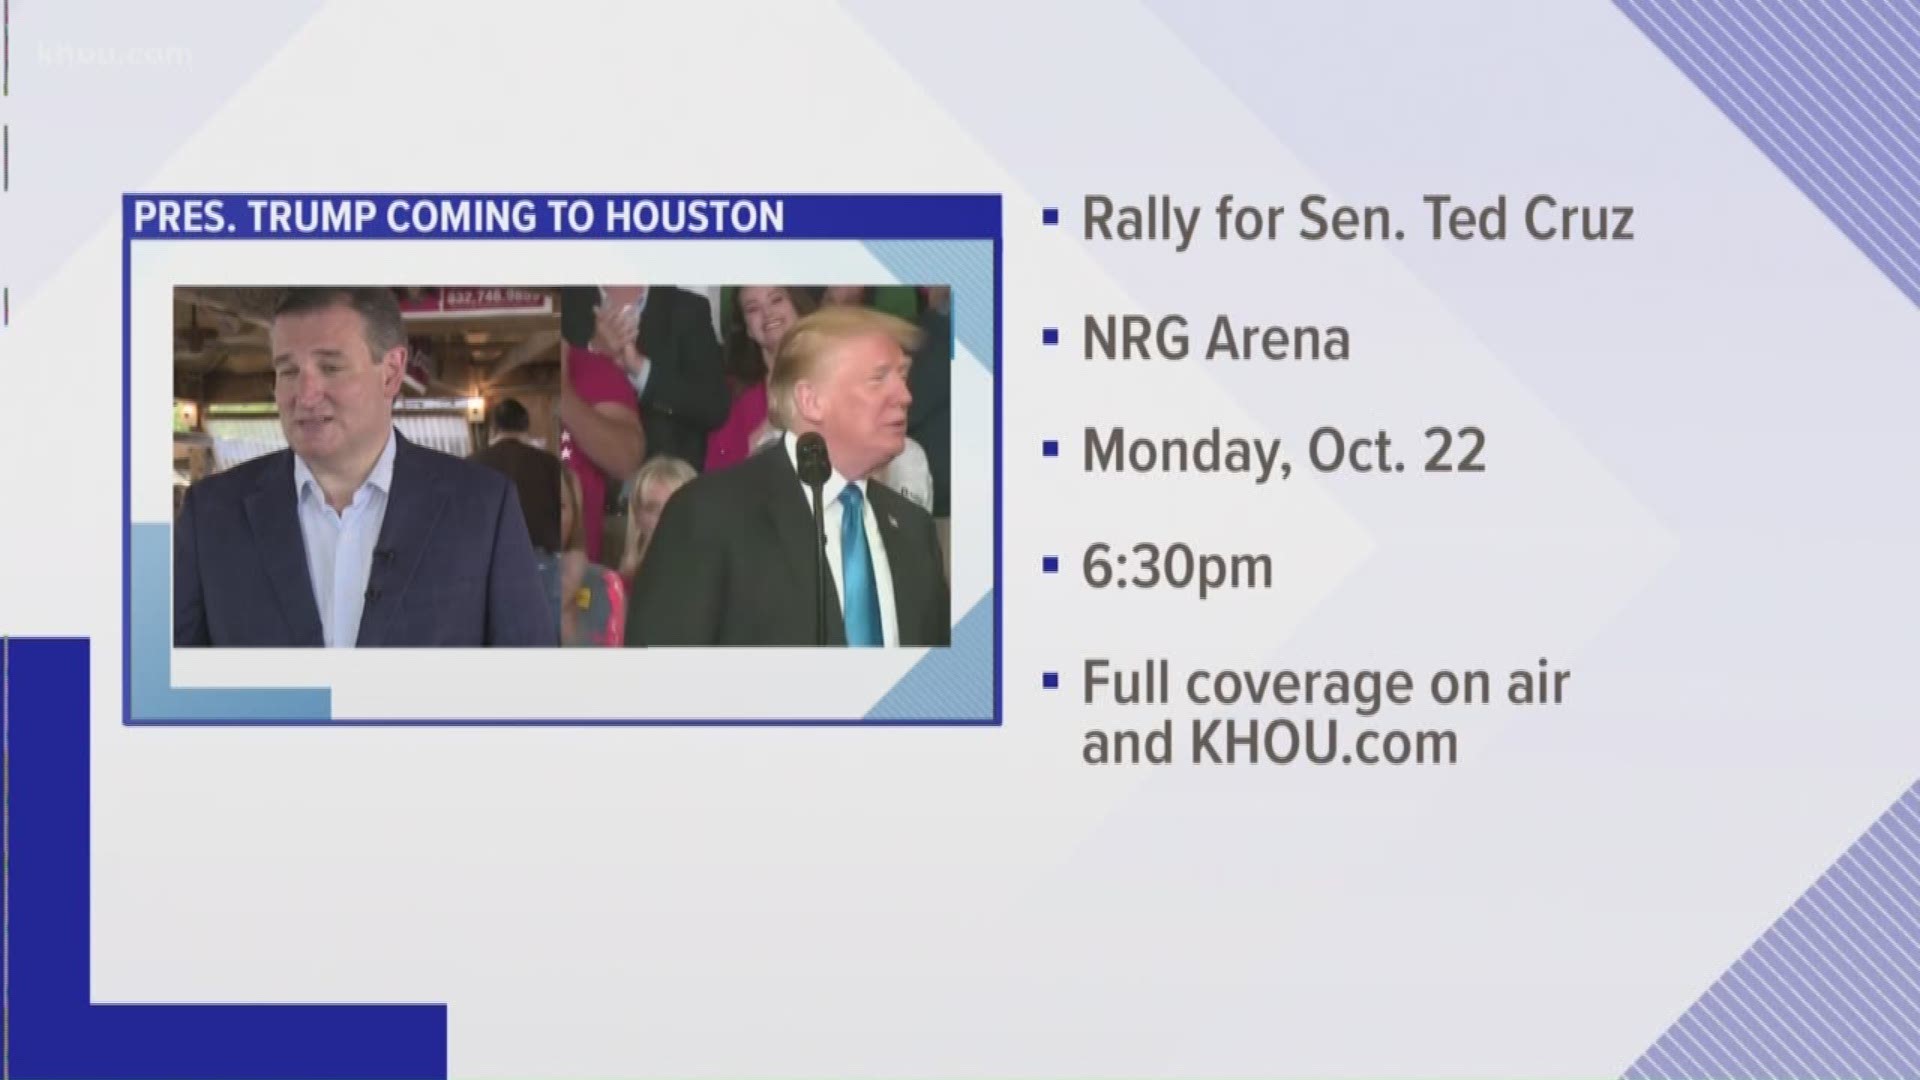 President Donald Trump is set to campaign in Houston next week with a MAGA rally.